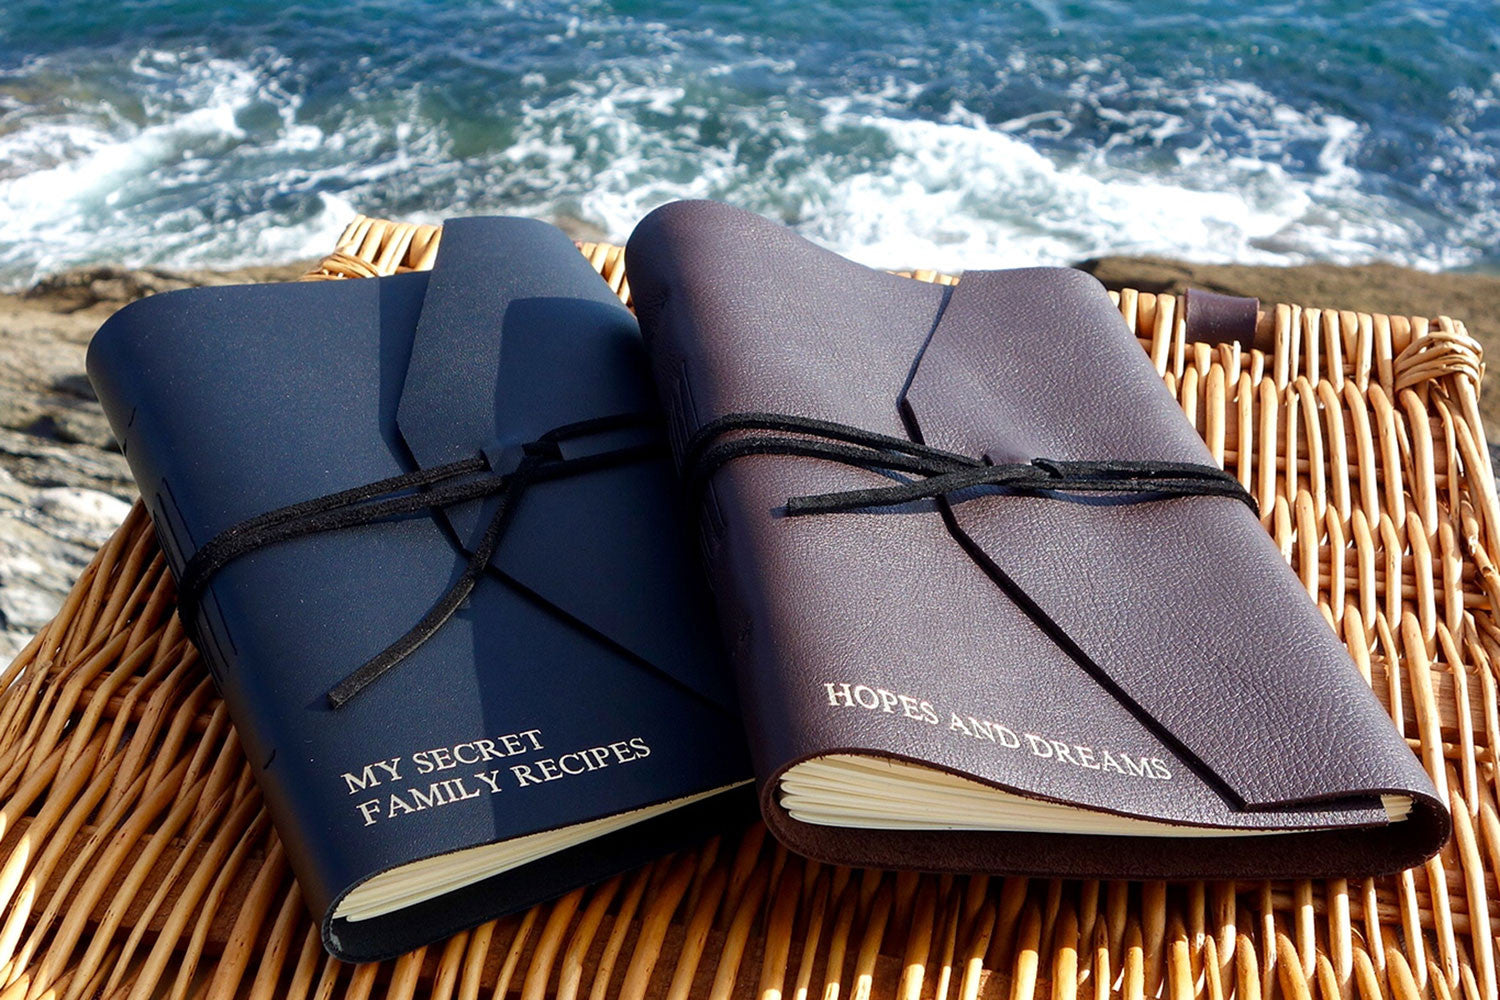 Two leather journals on a picnic hamper by the sea, personalised with My secret family recipes and Hopes and dreams